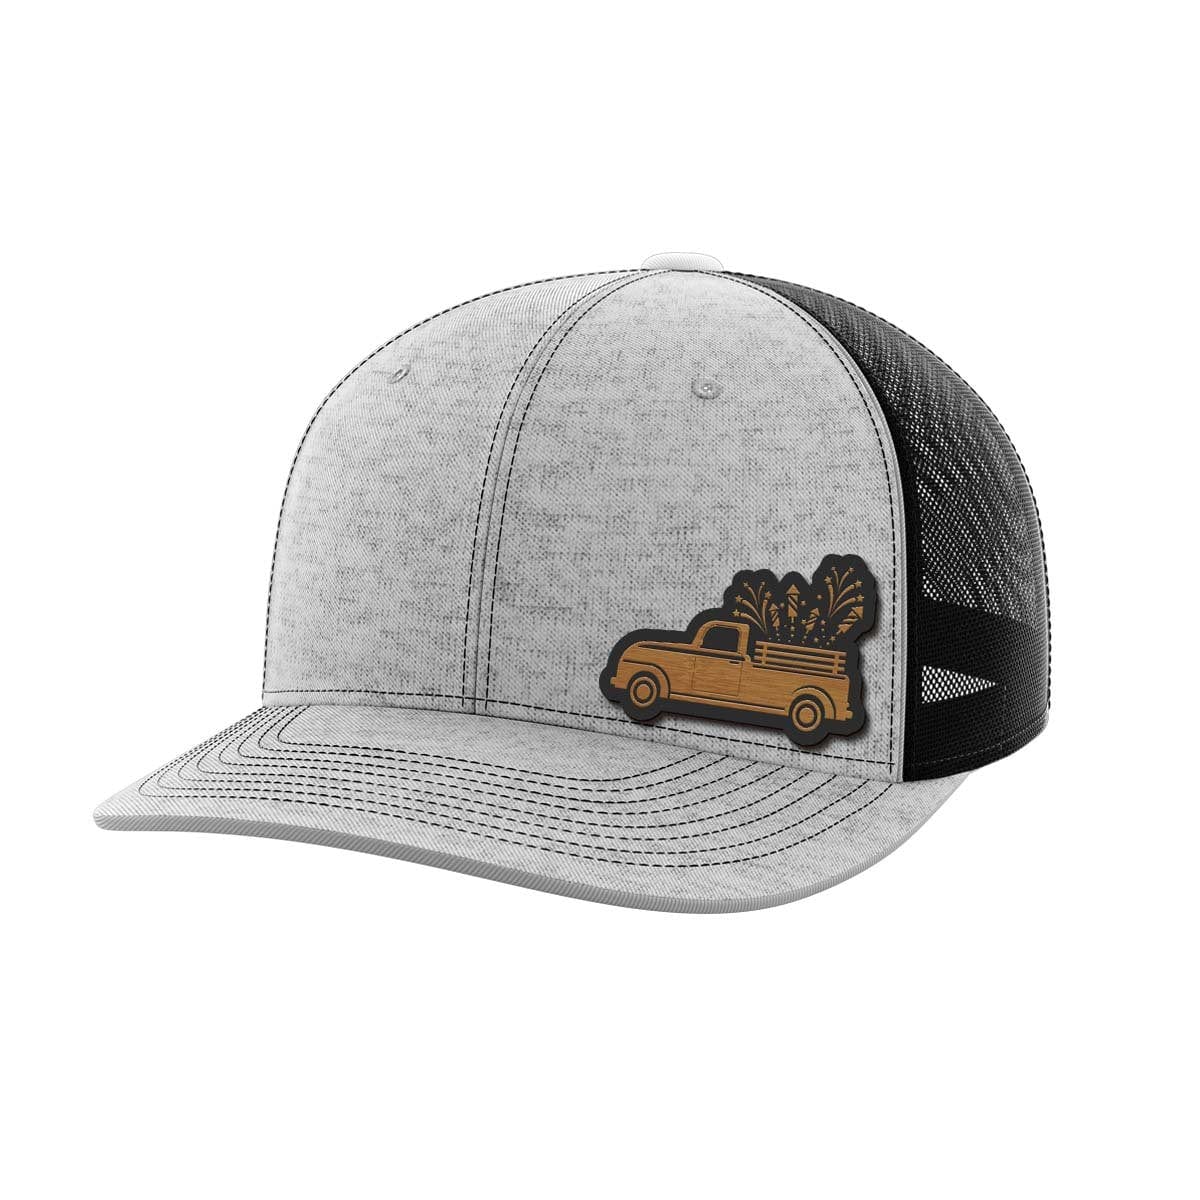 Fireworks Truck Bamboo Patch Hat - Greater Half